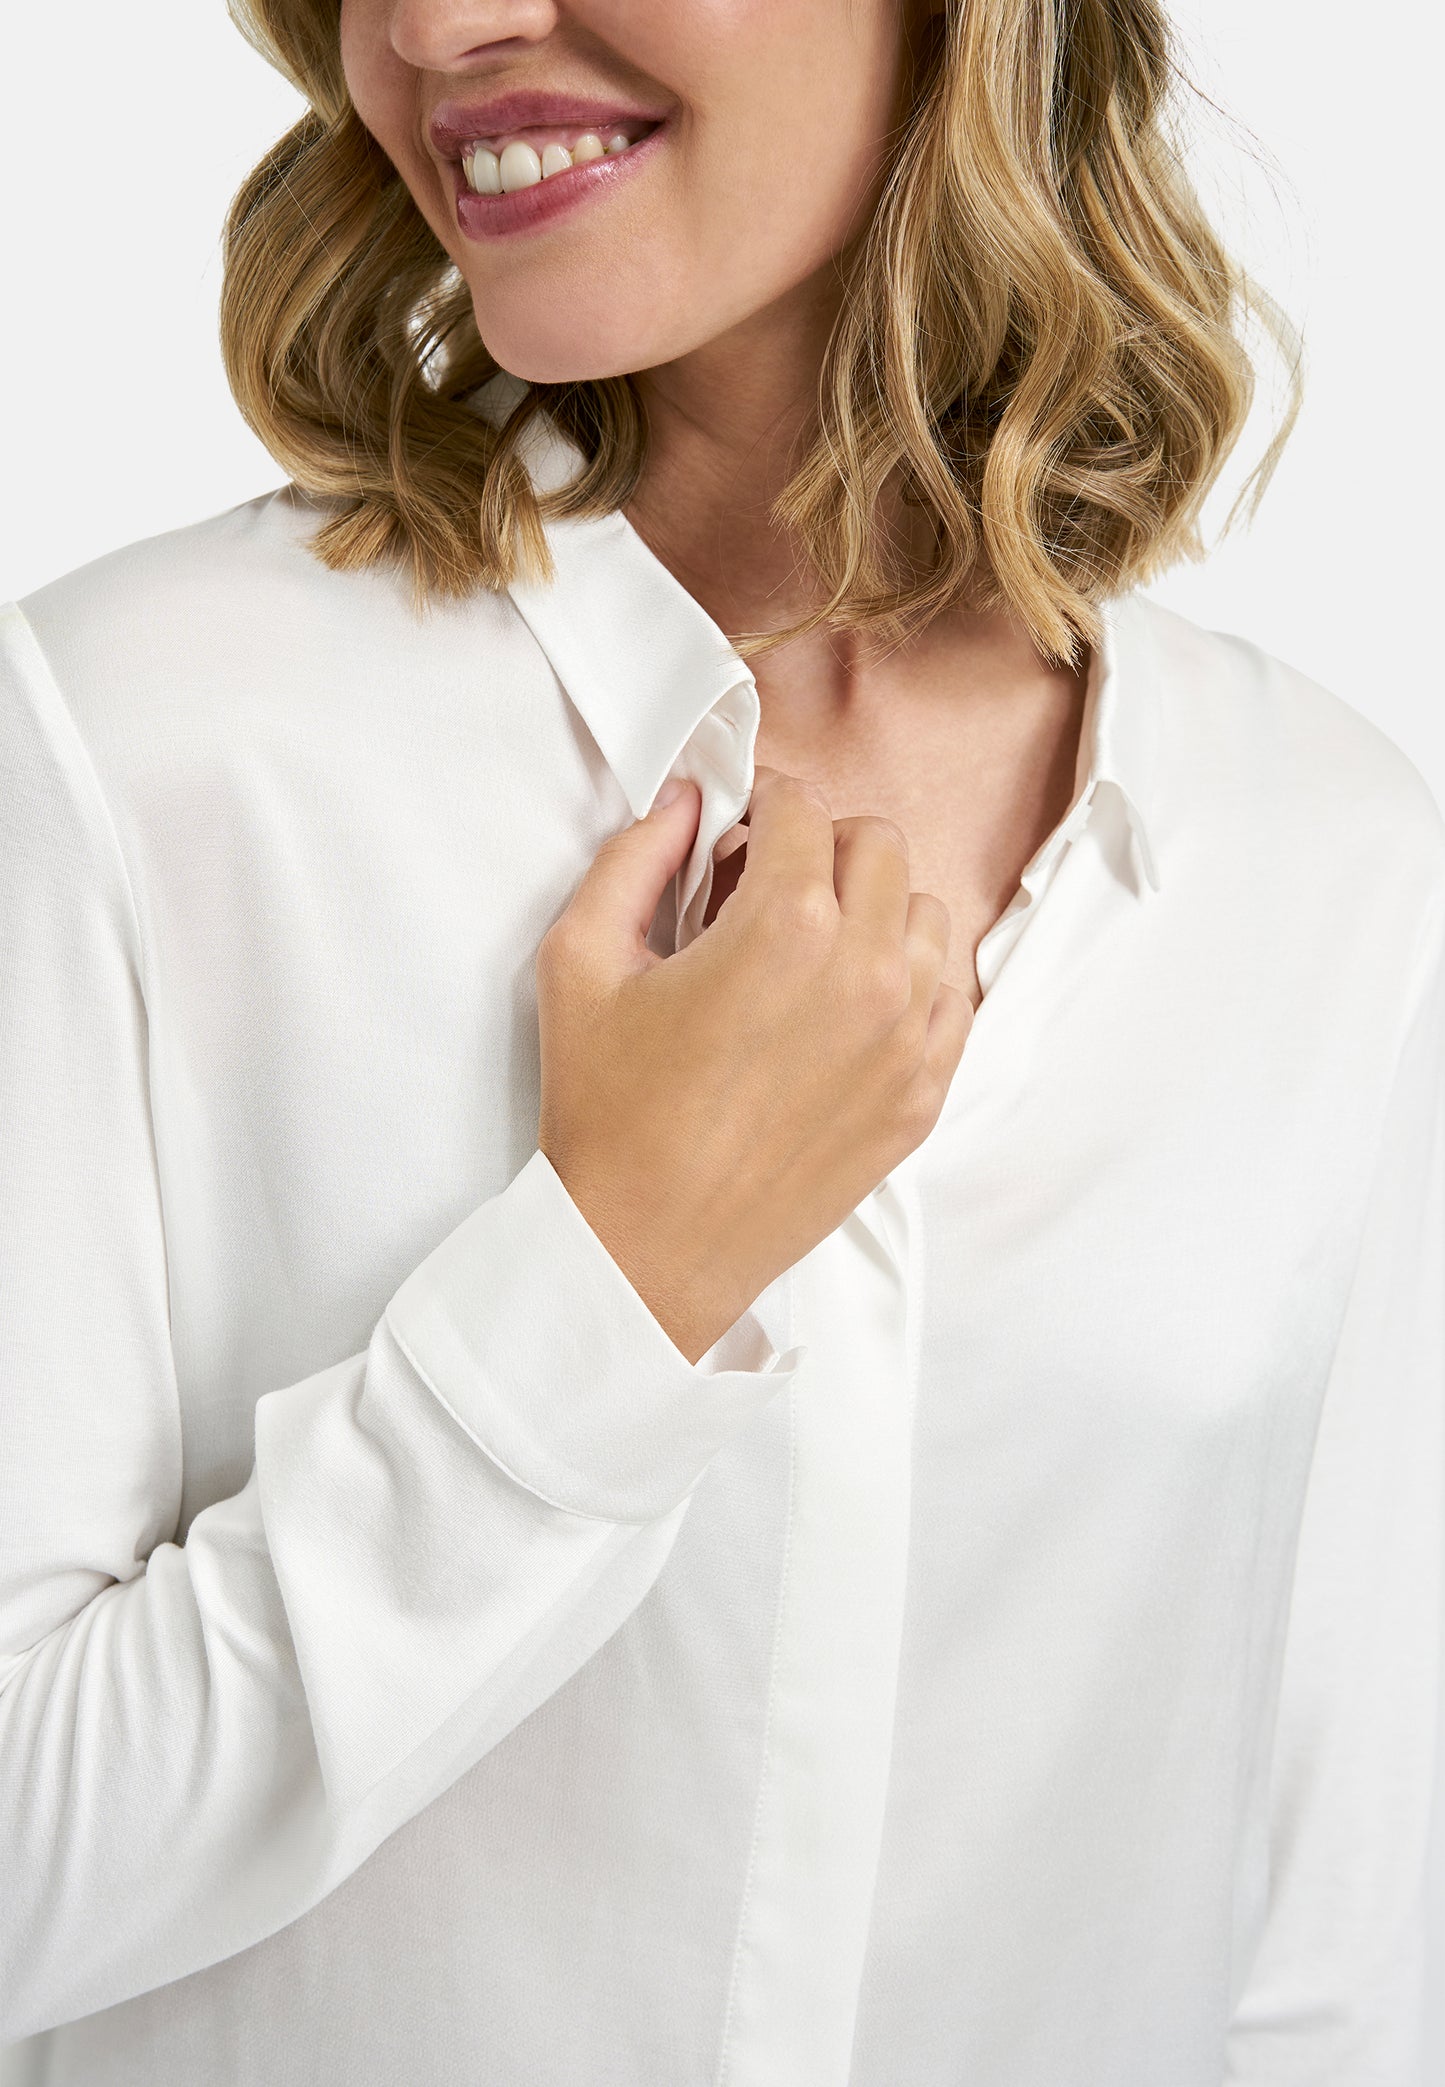 Blouse with collar, placket and 1/1 sleeves